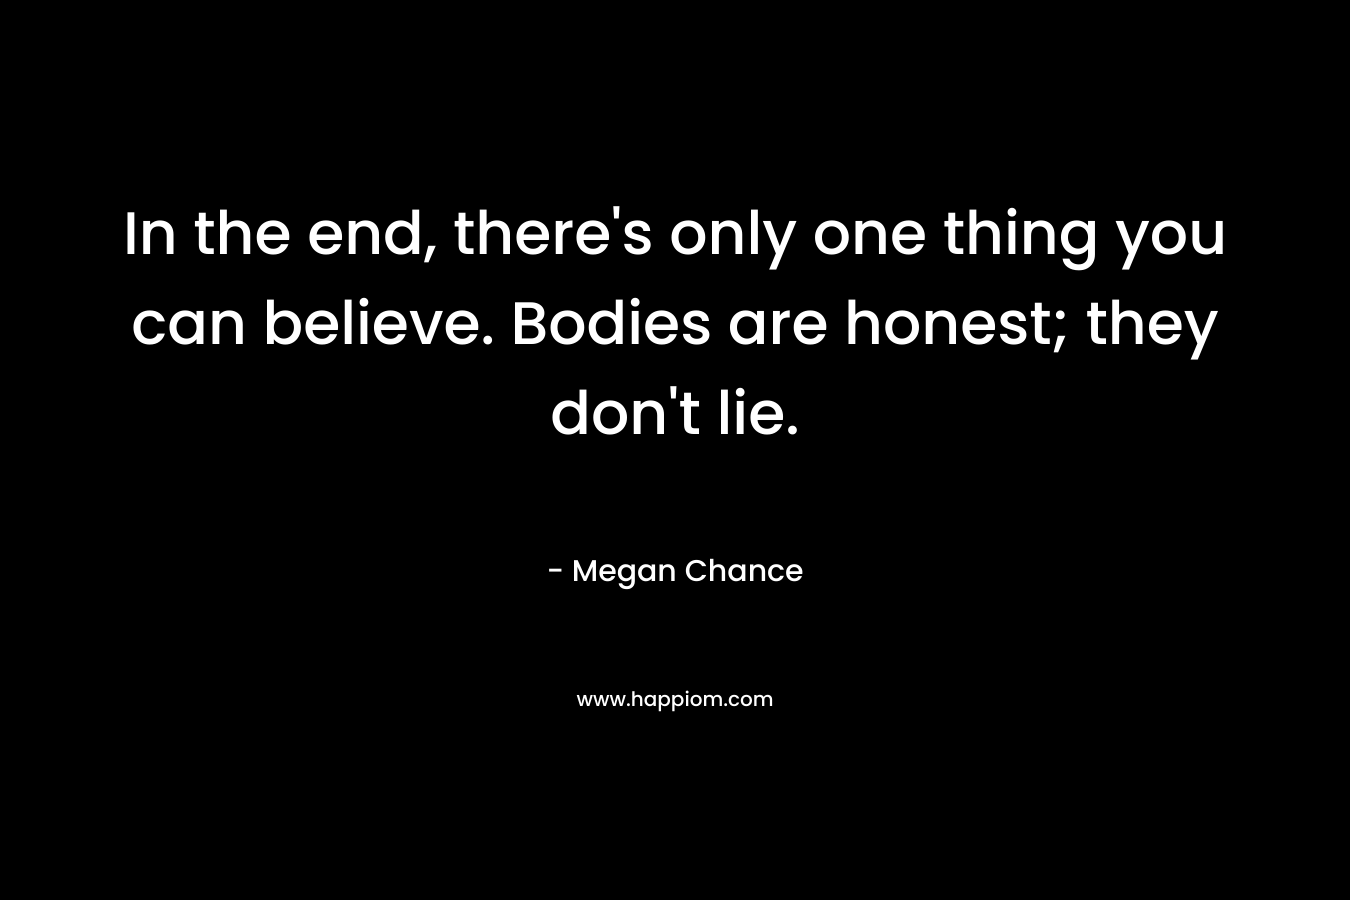 In the end, there's only one thing you can believe. Bodies are honest; they don't lie.